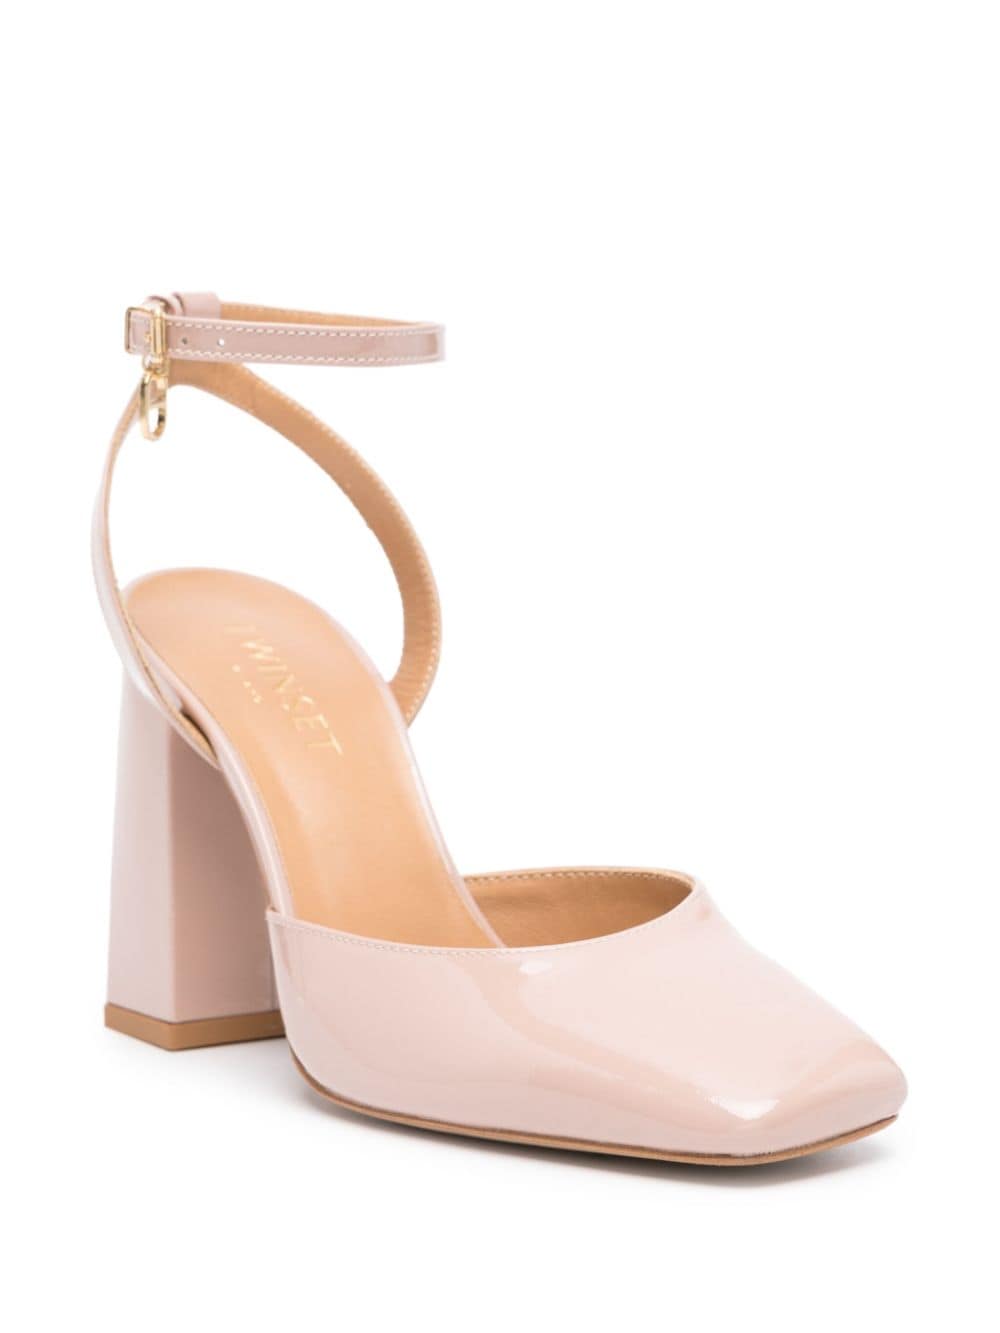 Blush pink calf leather sandals